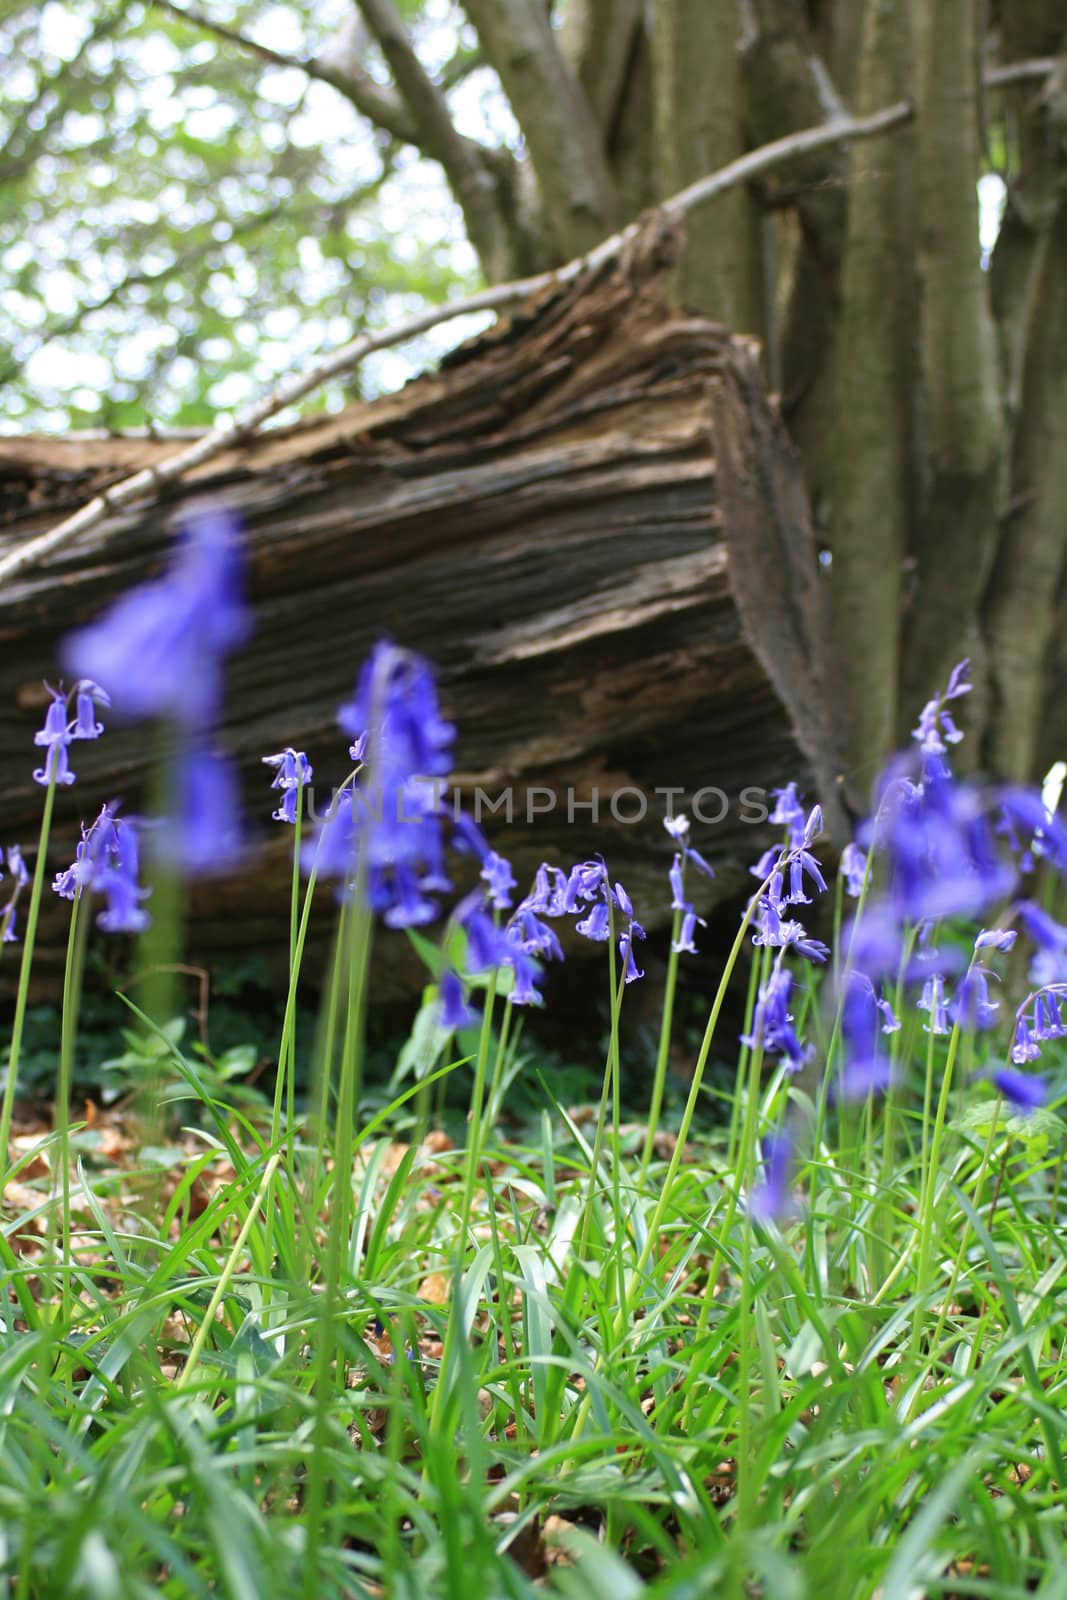 A low angled image of Spring Bluebells in a wooded area with the stump of a fallen tree visible in the background.